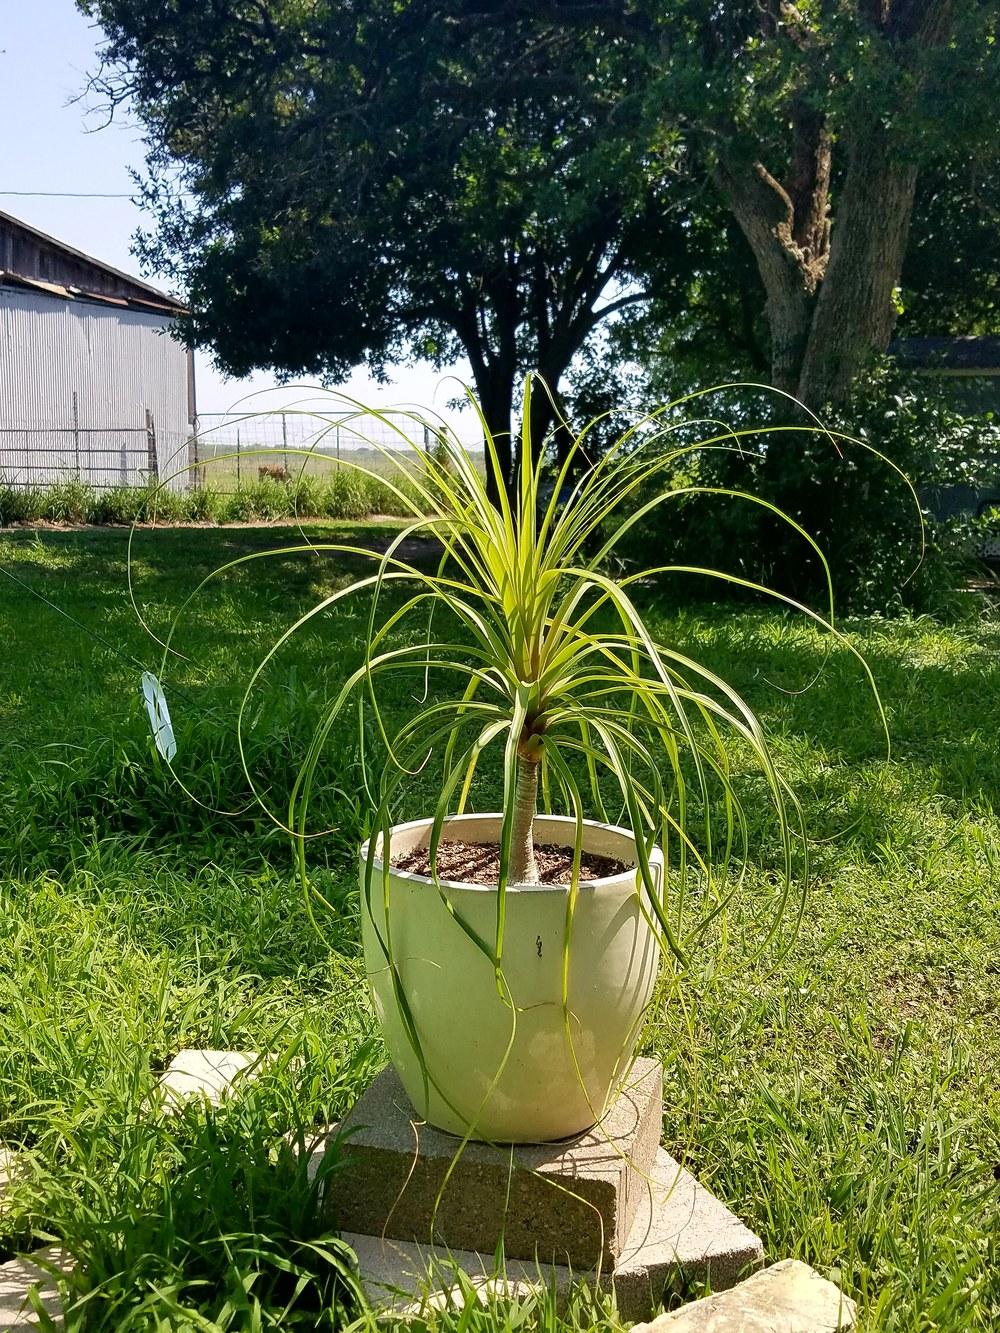 Photo of Ponytail Palm (Beaucarnea recurvata) uploaded by JamesAcclaims